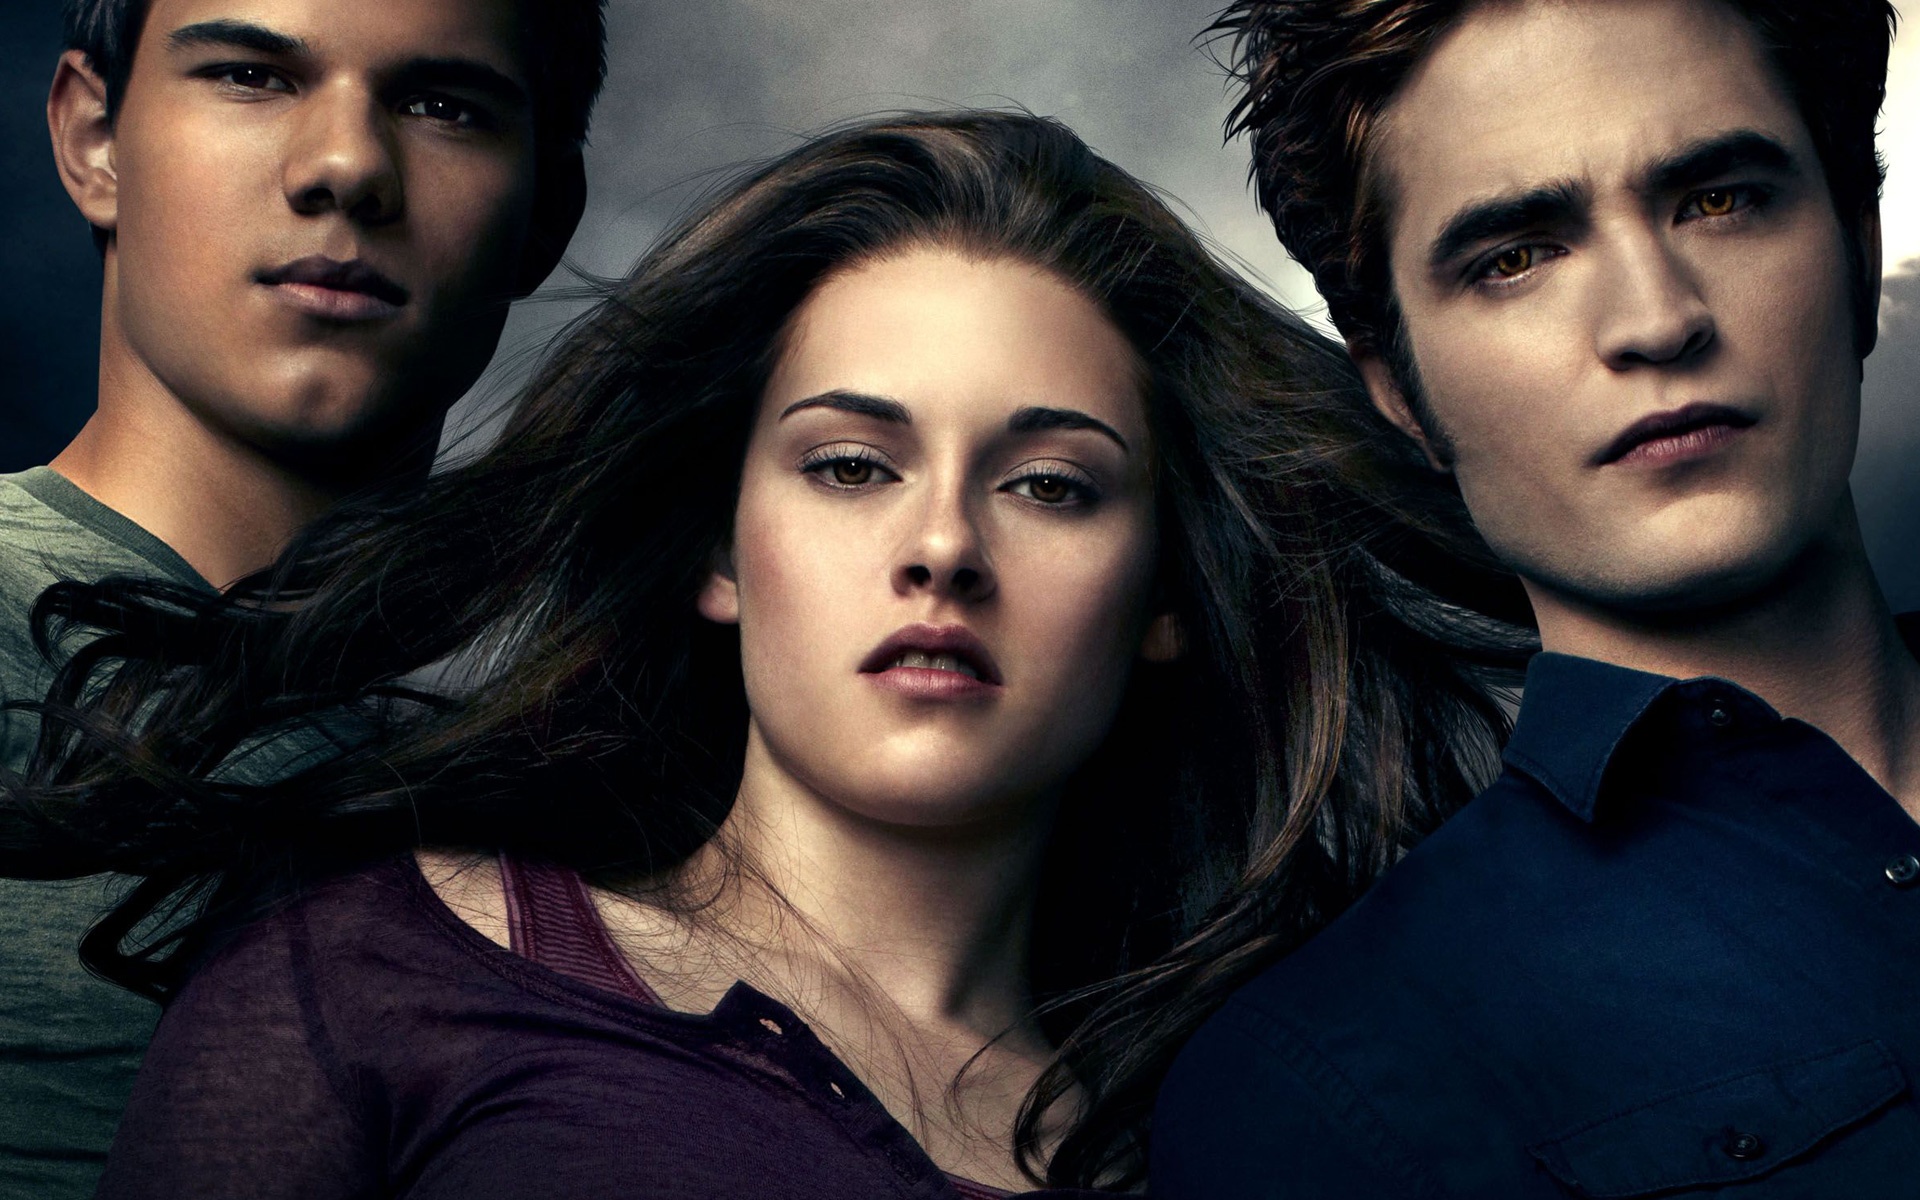 Bella Swan stands between Edward Cullen and Jacob Black in this Twilight movie scene.